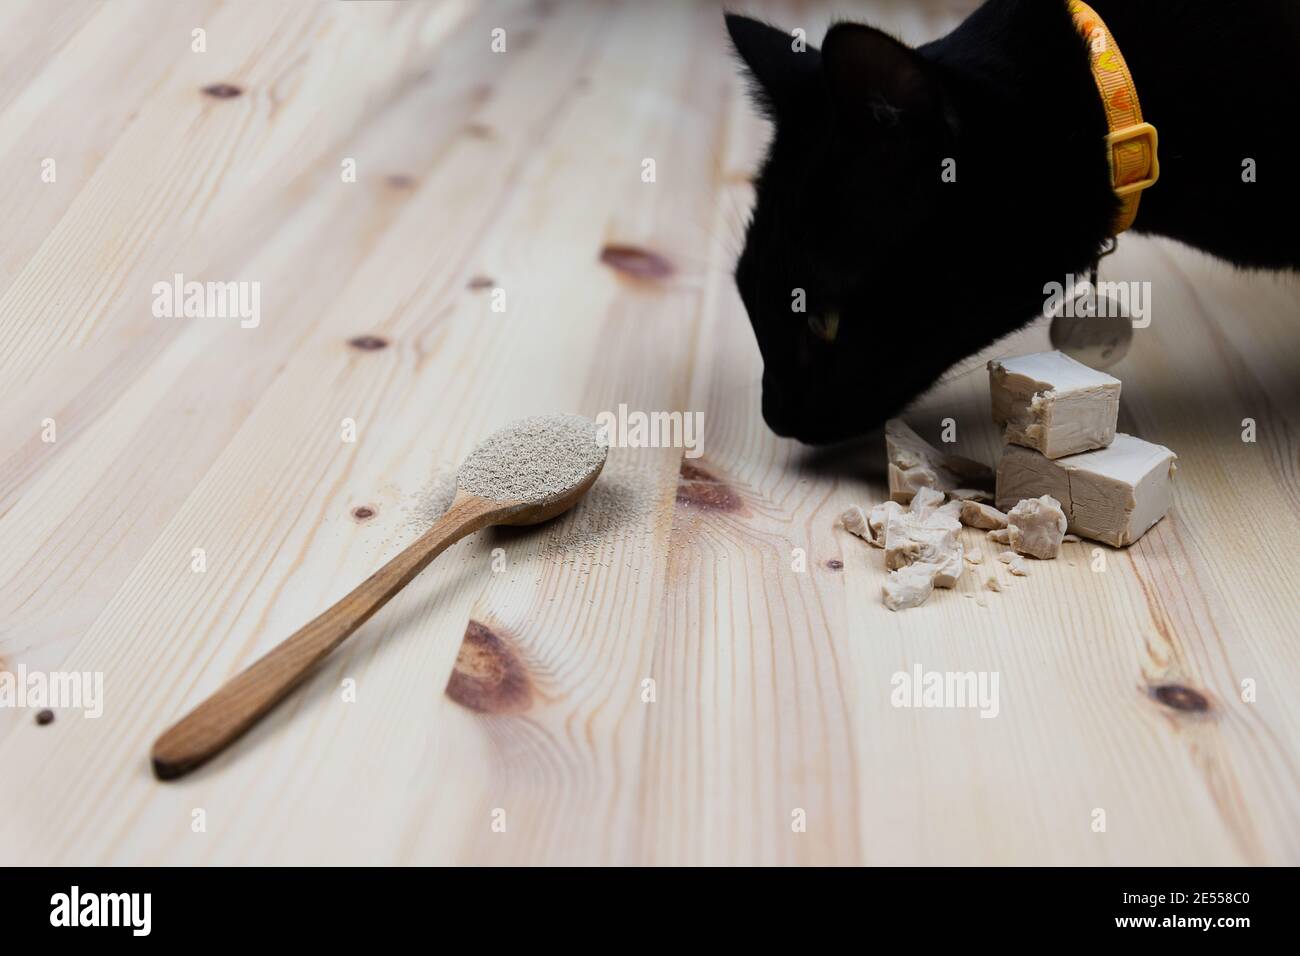 Black cat smelling different types of yeast. Dry yeast in a wooden spoon and fresh bakers yeast in cubes and broken pieces. Baking and making bread an Stock Photo